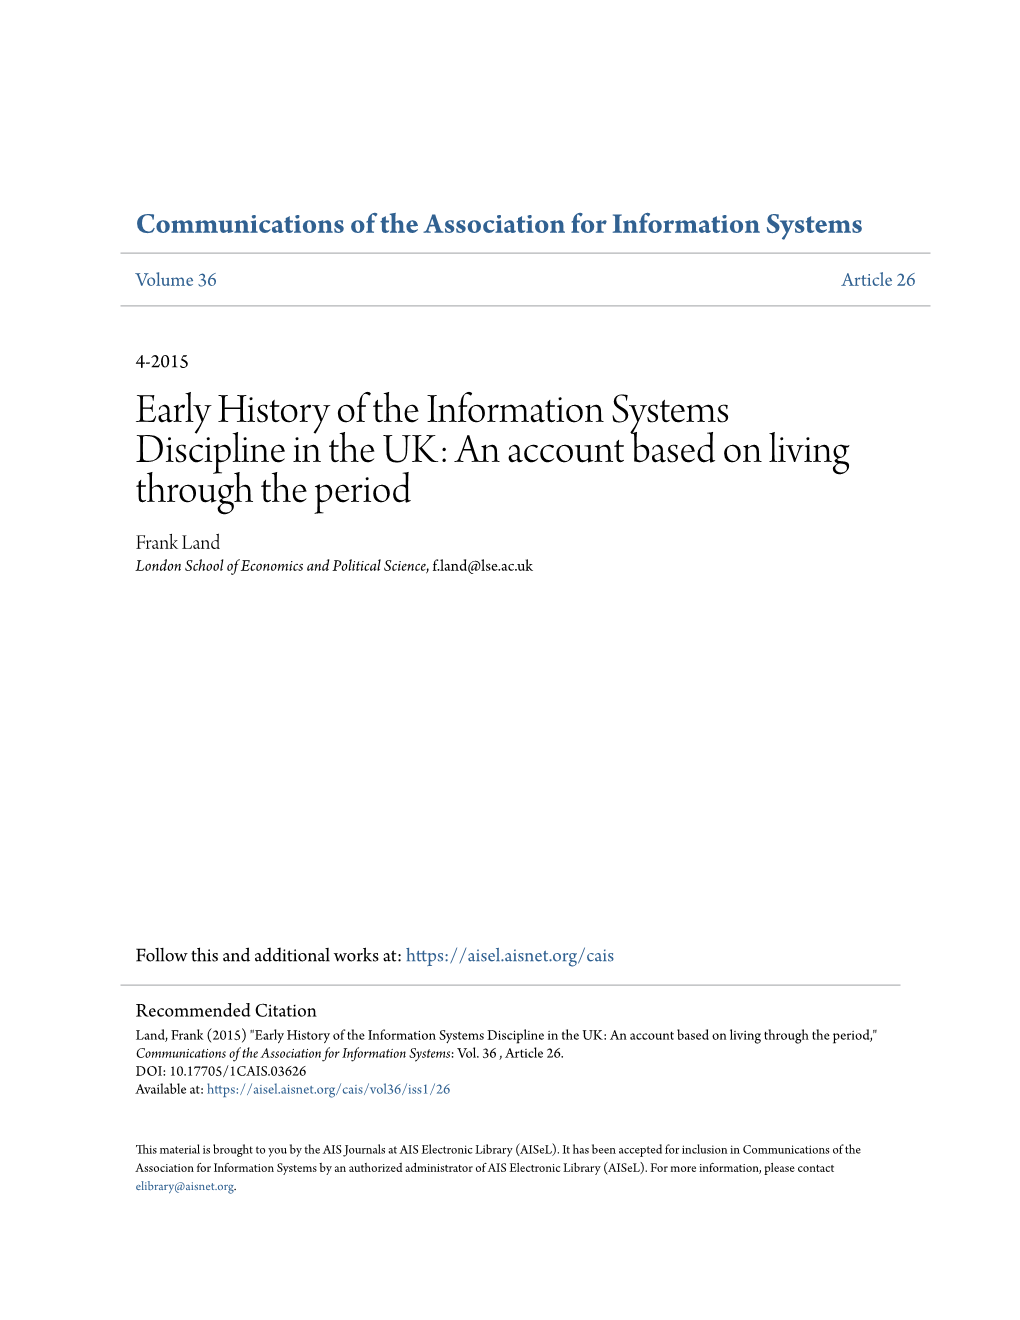 Early History of the Information Systems Discipline